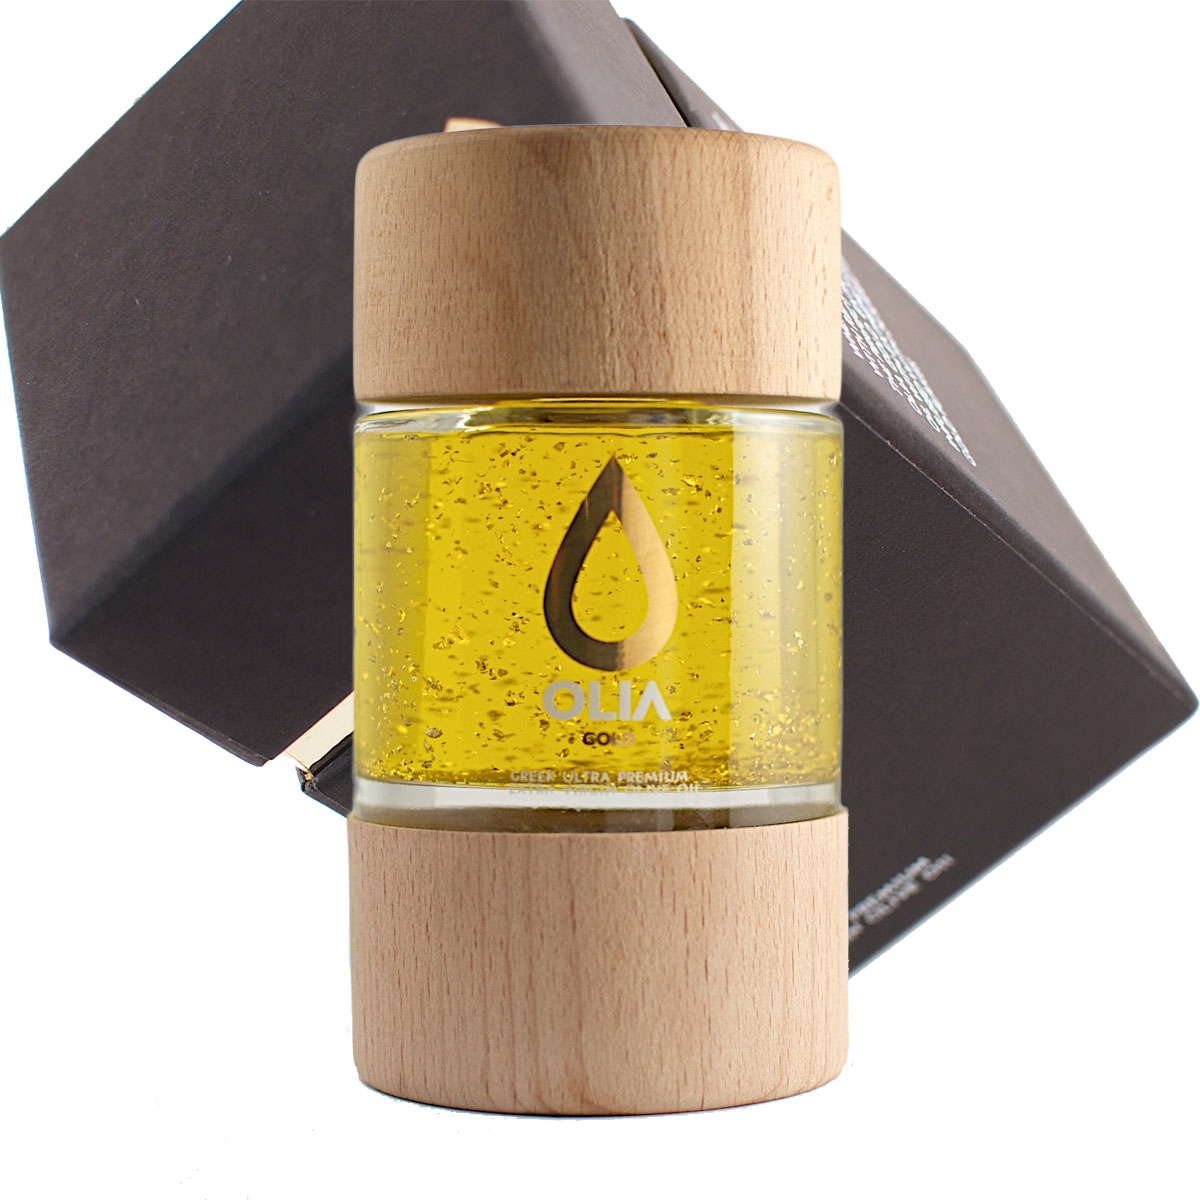 gold cross olive oil review